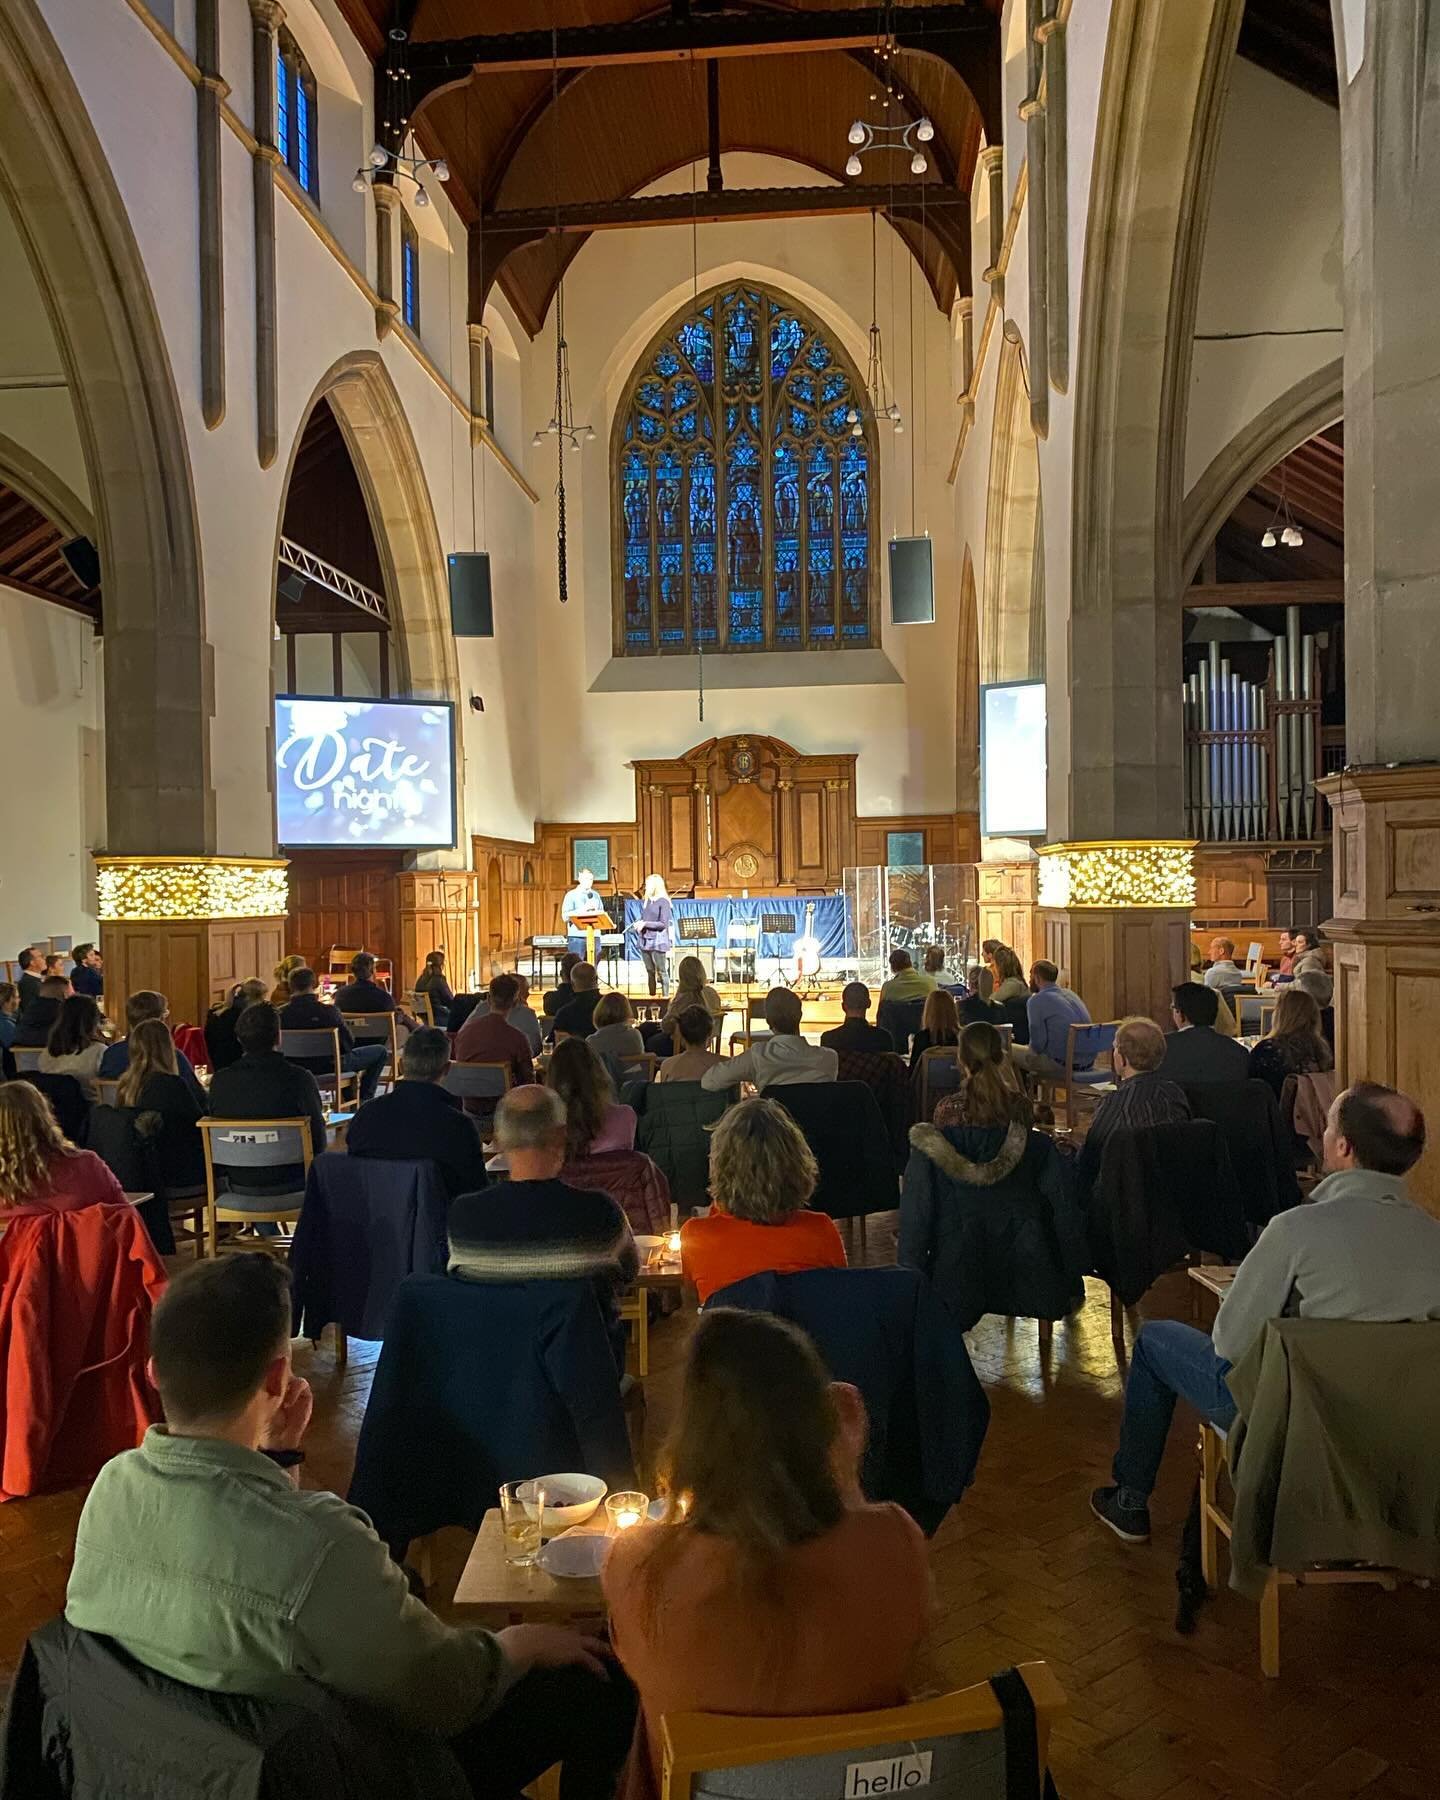 A wonderful evening with over 50 couples attending DATE NIGHT as we talked about prioritising our marriages.
#church #sw18 #southfields #marriage #churchofengland #dioceseofsouthwark #datenight